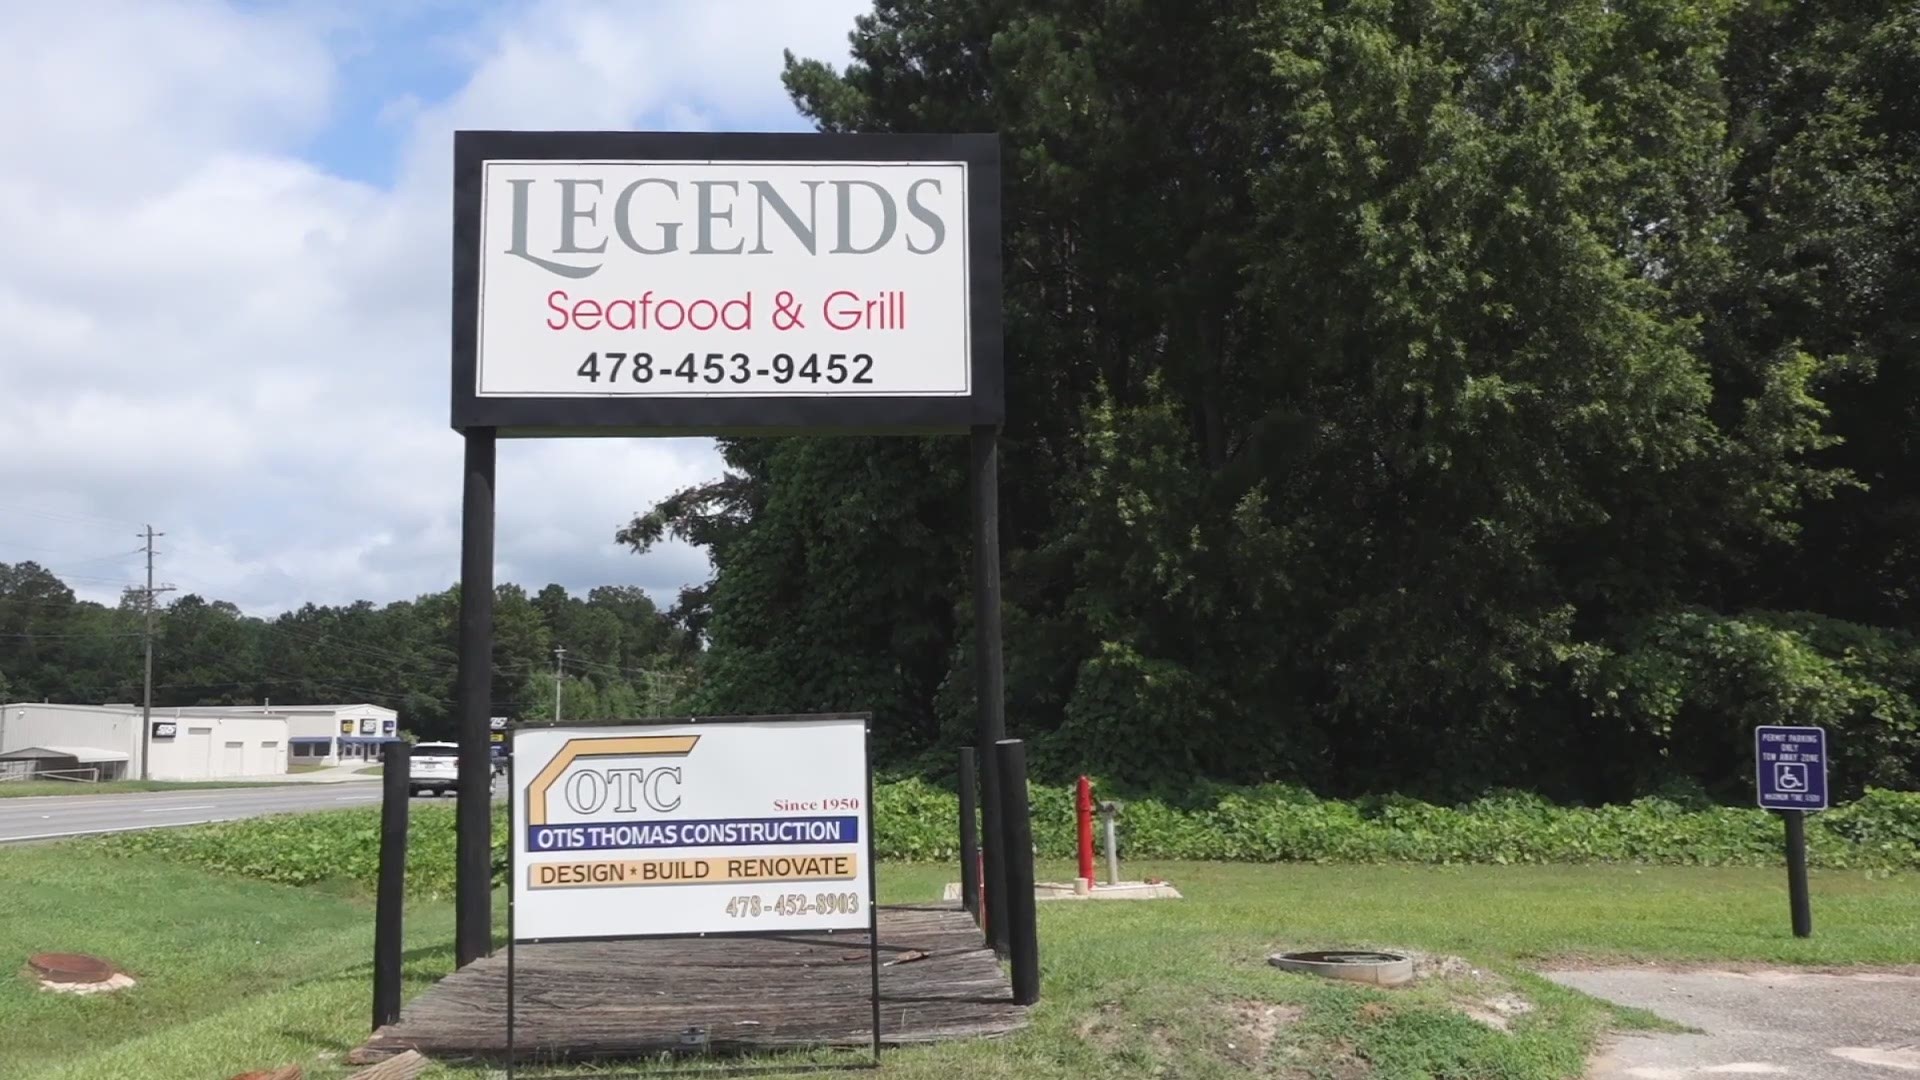 You can stop by Legends after a day on Lake Sinclair for some steak and seafood.